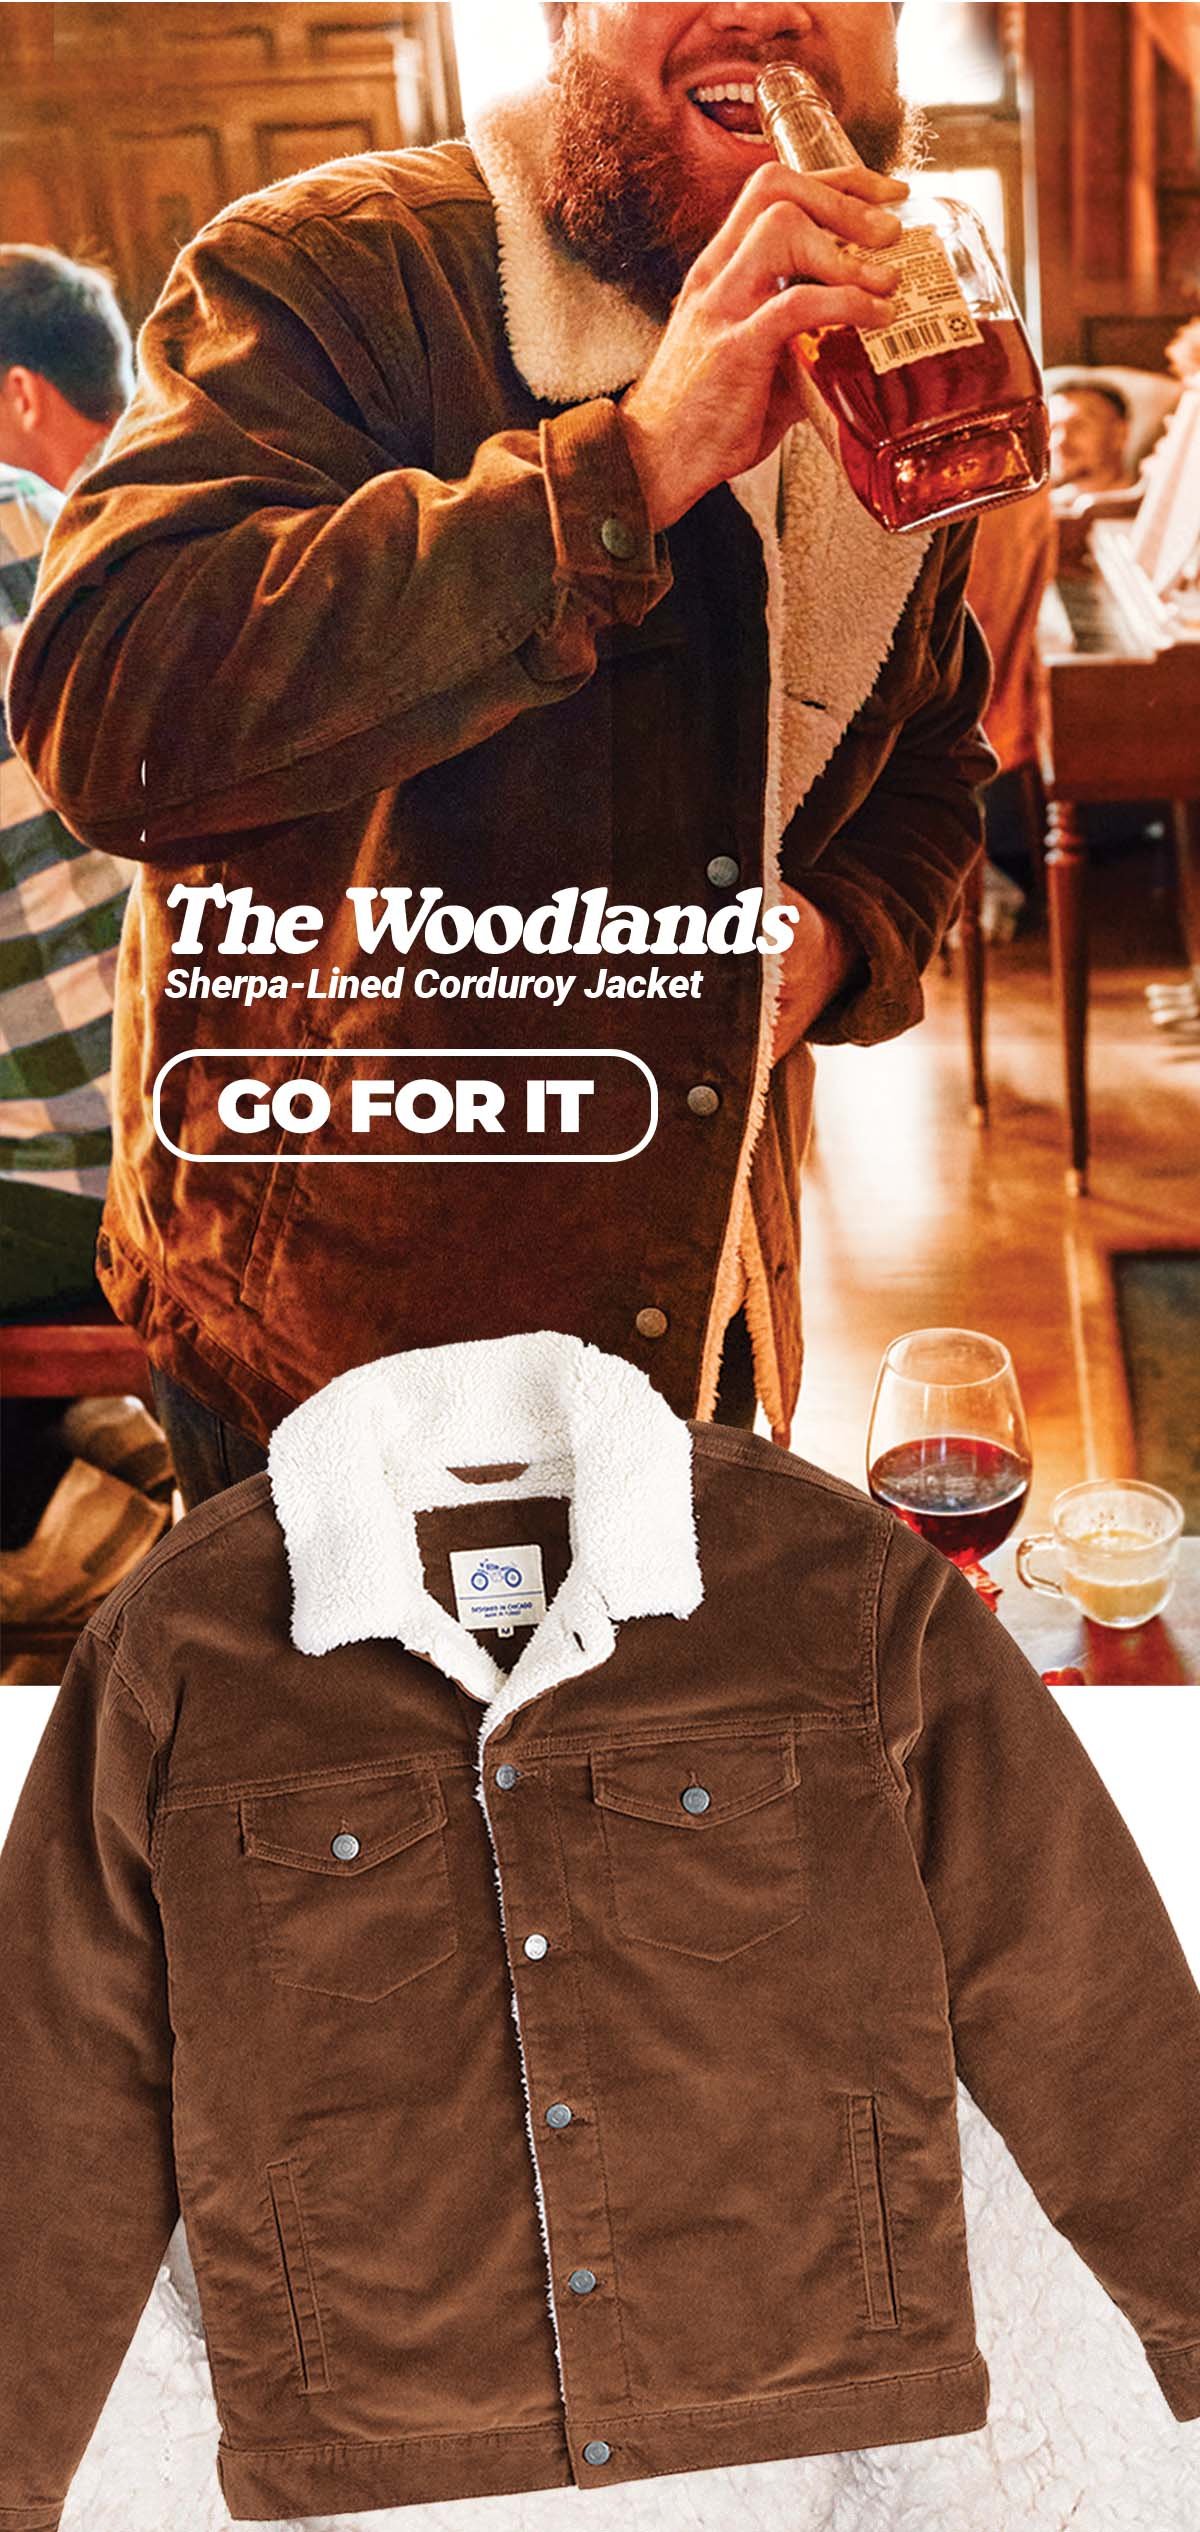 The Woodlands Sherpa-Lined Corduroy Jacket